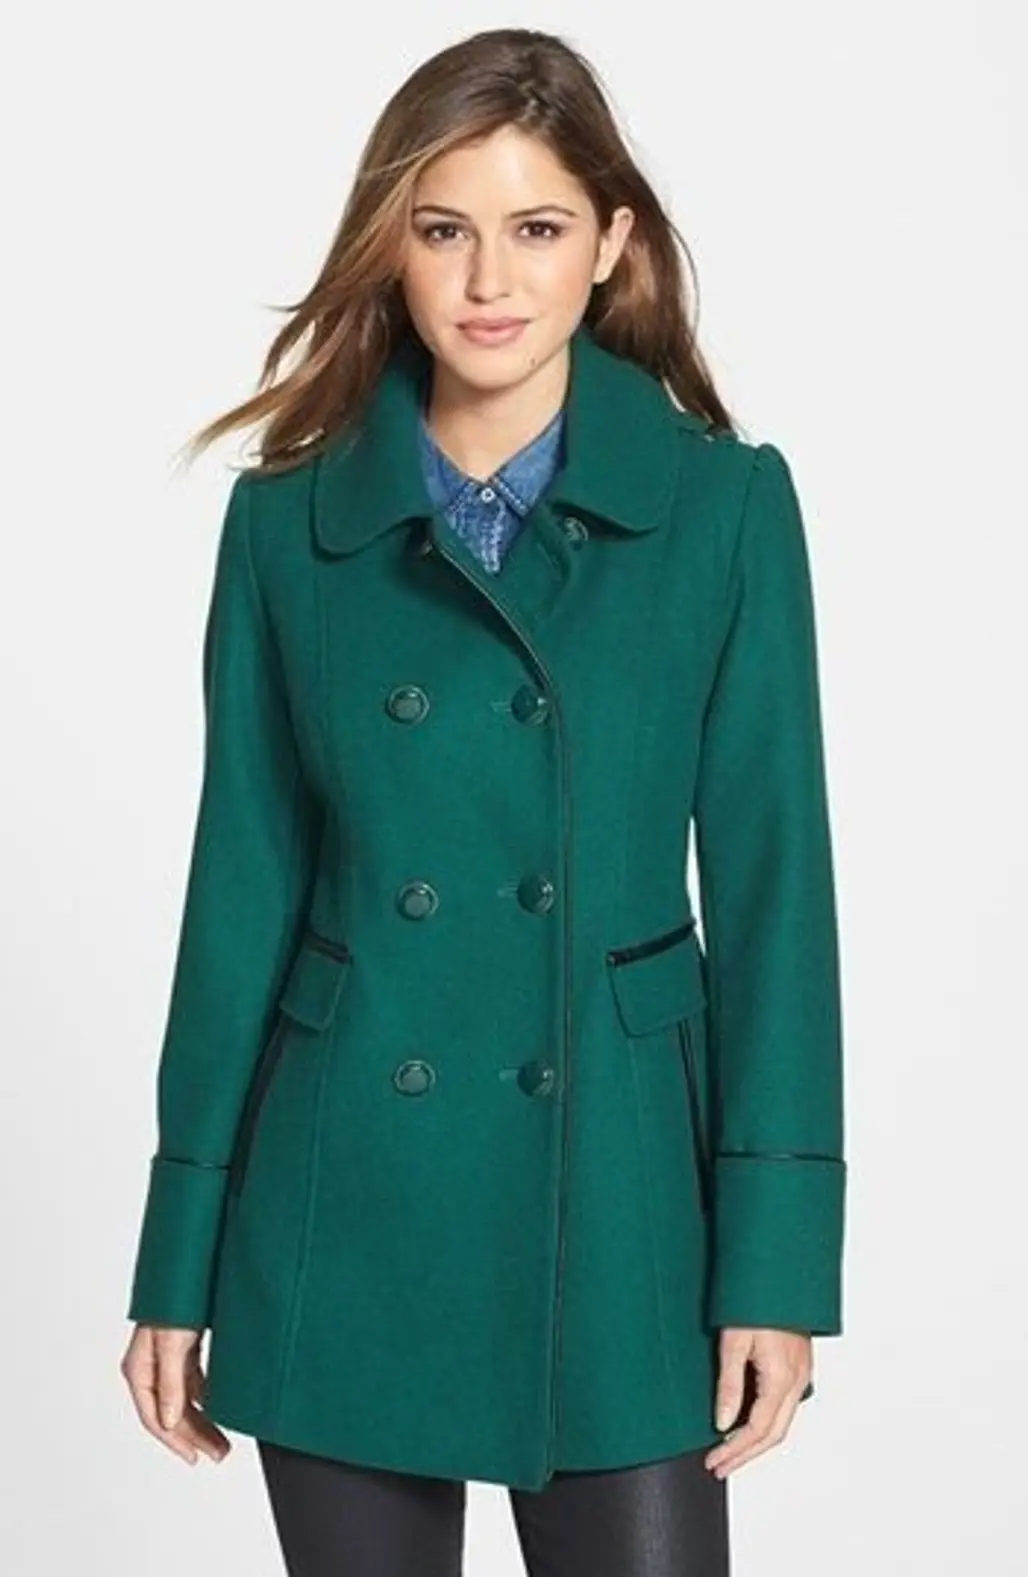 Kensie – Double Breasted Wool Blend Coat with Faux Leather Trim